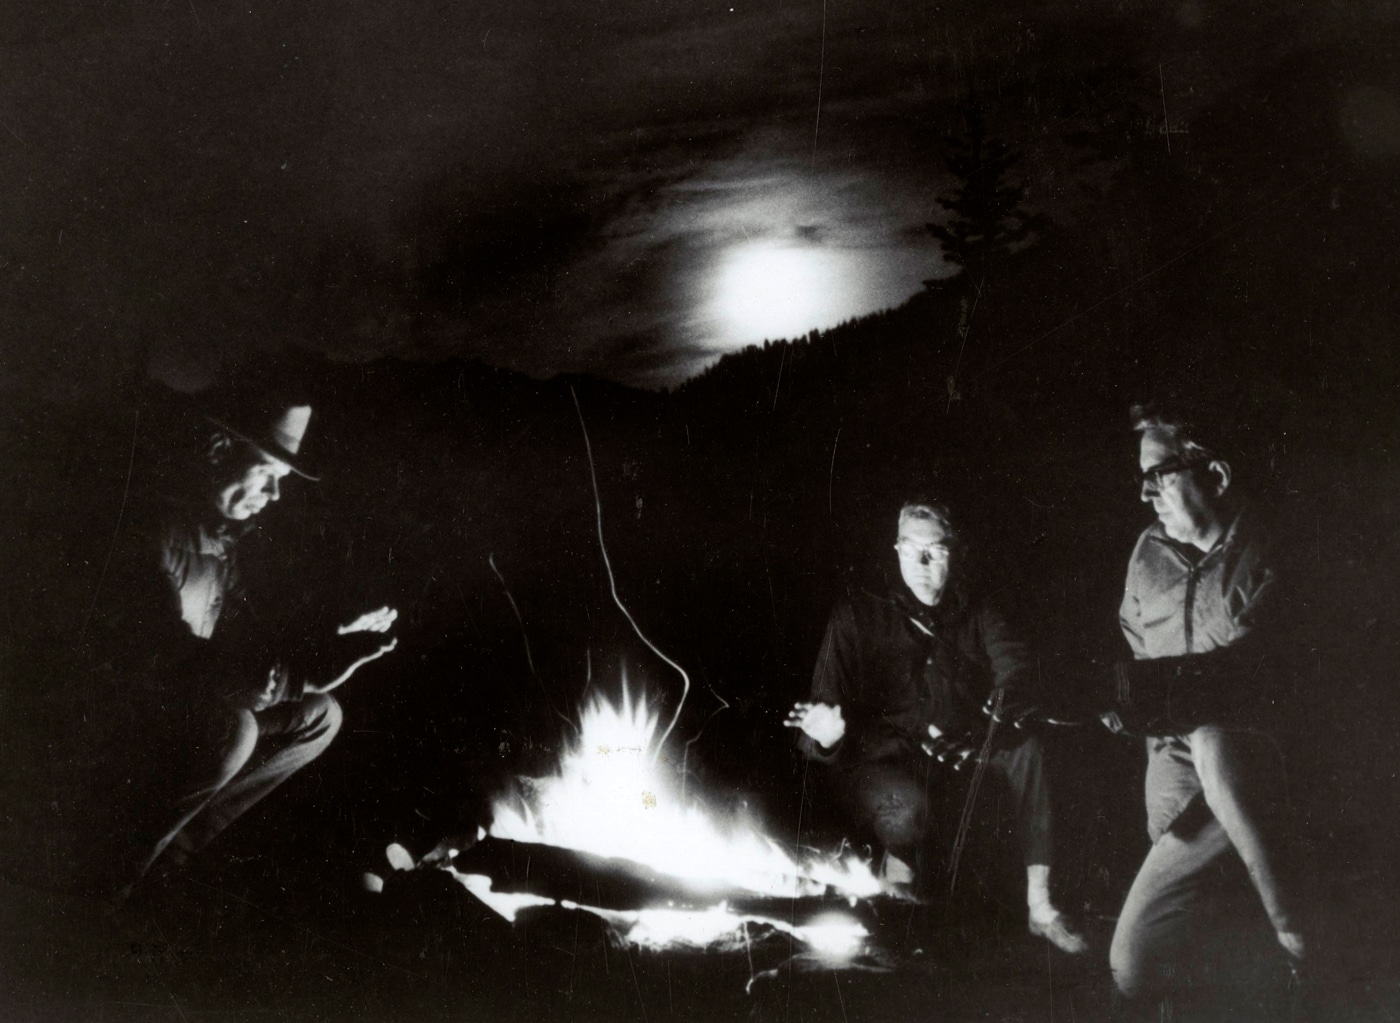 In this high contrast B&W photograph, we see three men around a campfire at night.